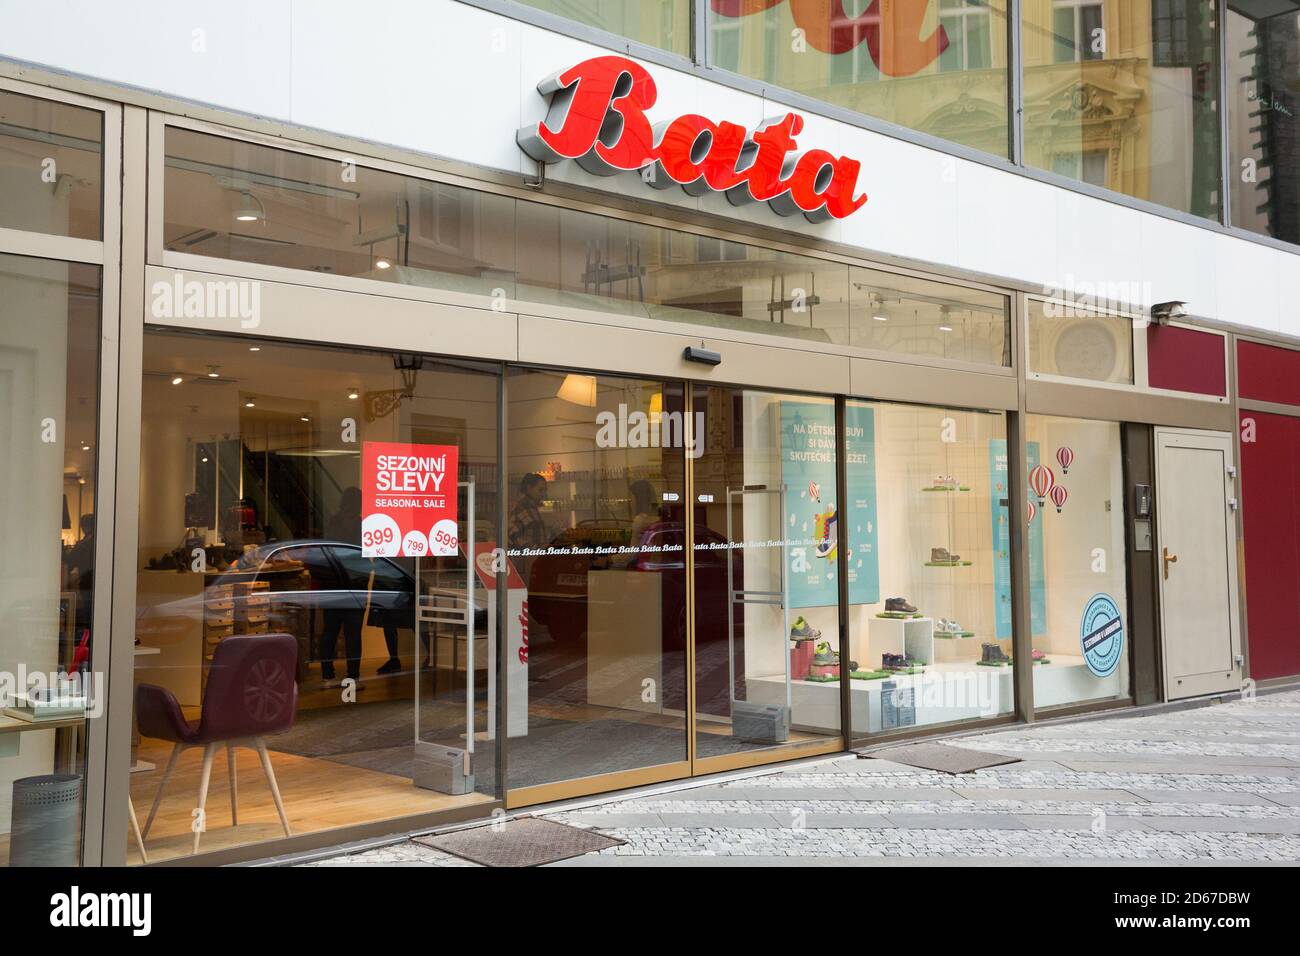 Bata Shop High Resolution Stock Photography and Images - Alamy